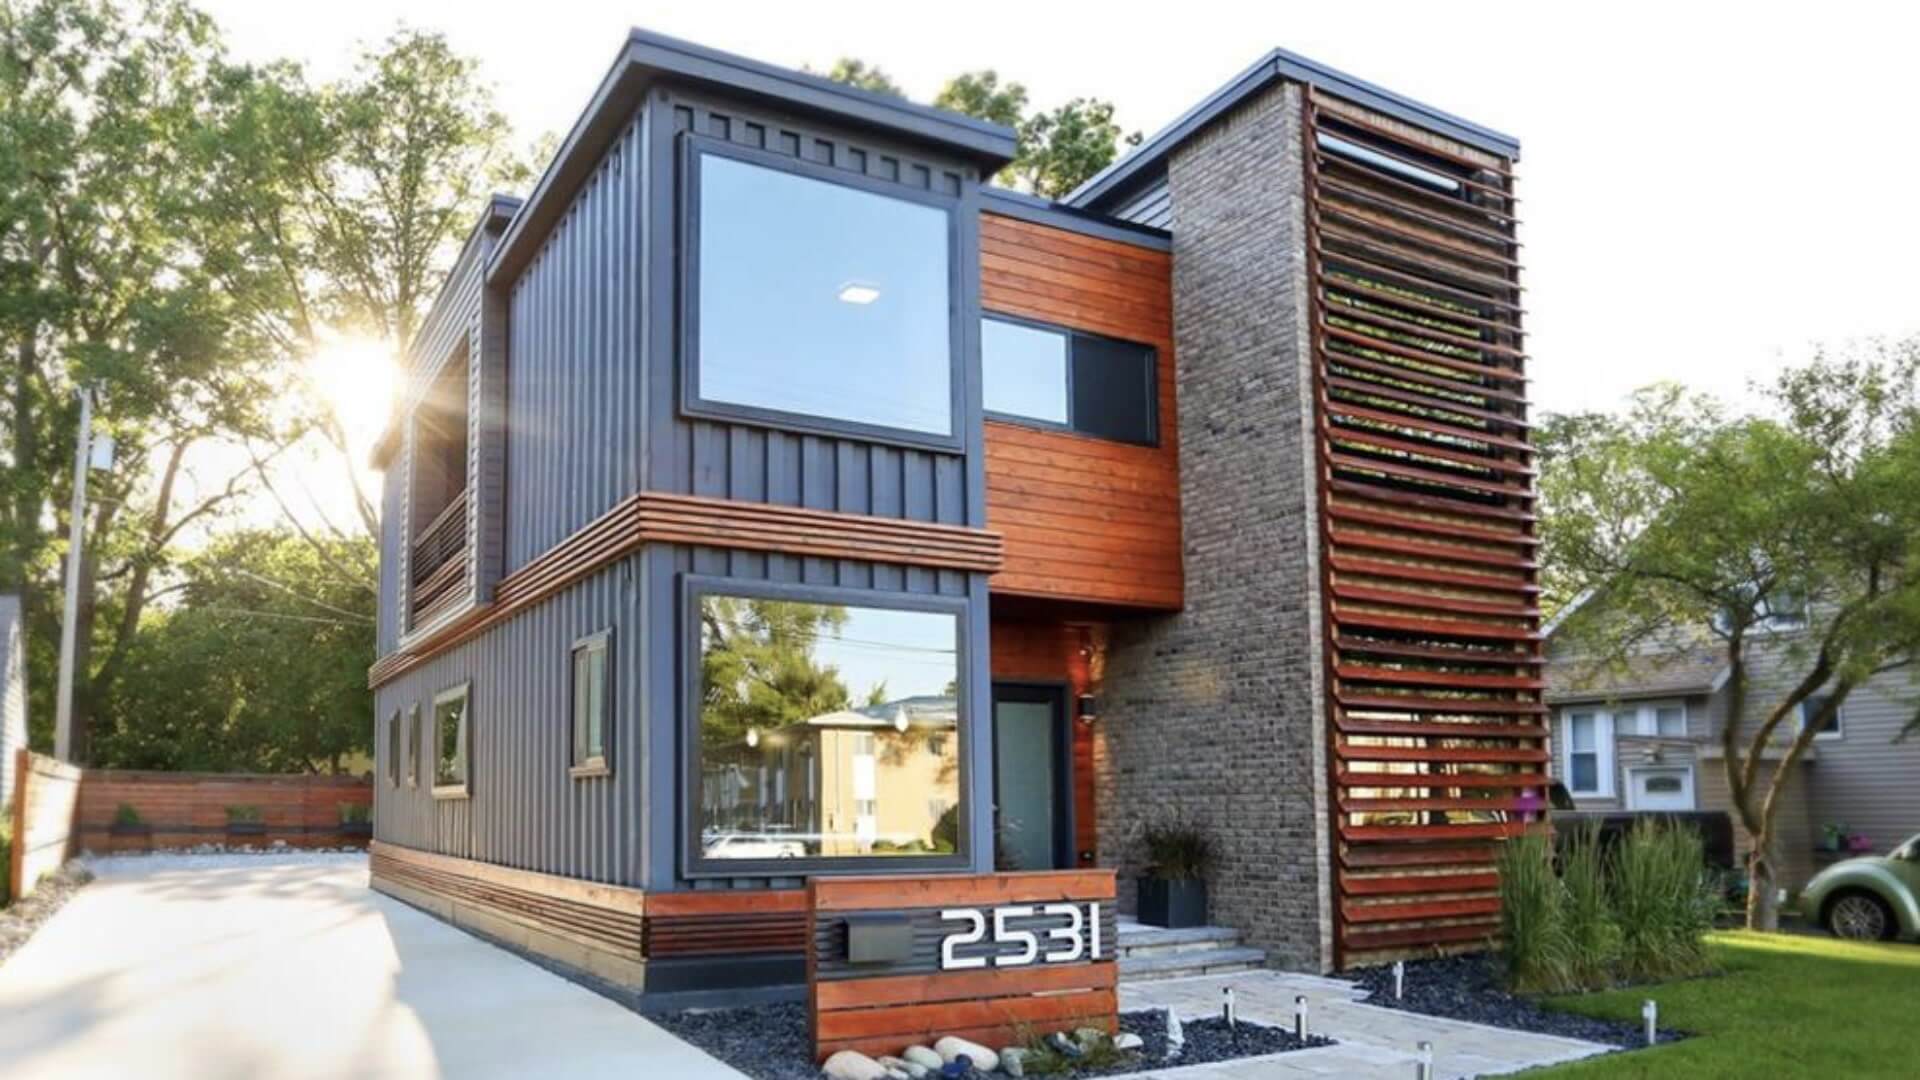 33 Best Shipping Container Homes Ideas With Pictures